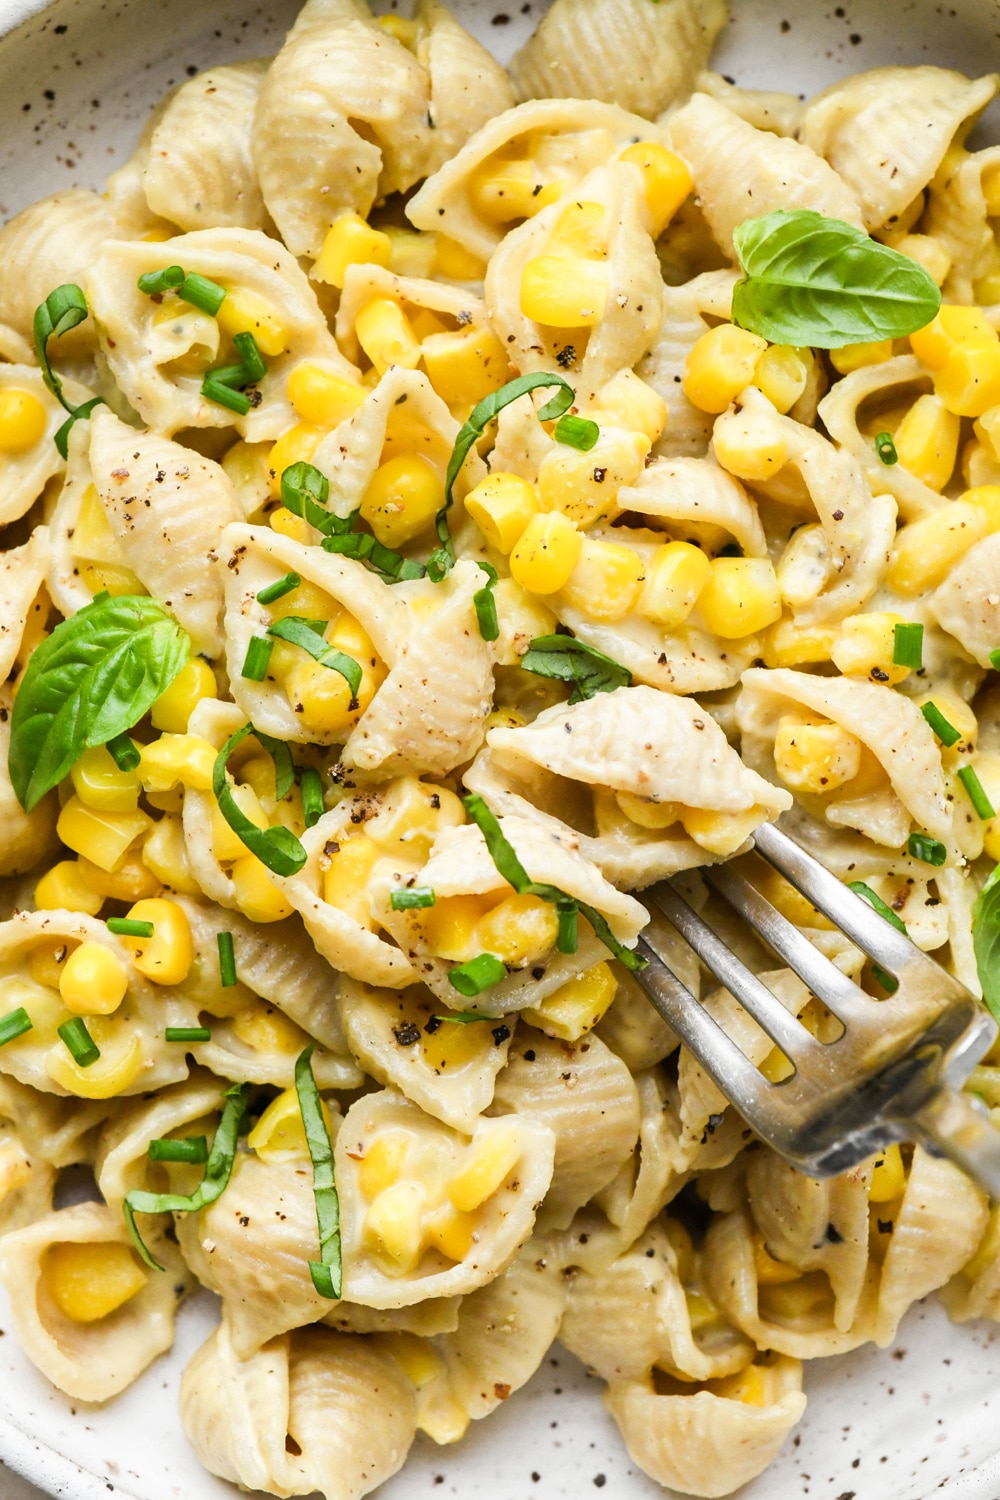 A close up image of a fork digging into a bowl of creamy dairy free corn pasta that is topped with fresh basil and cracked black pepper.